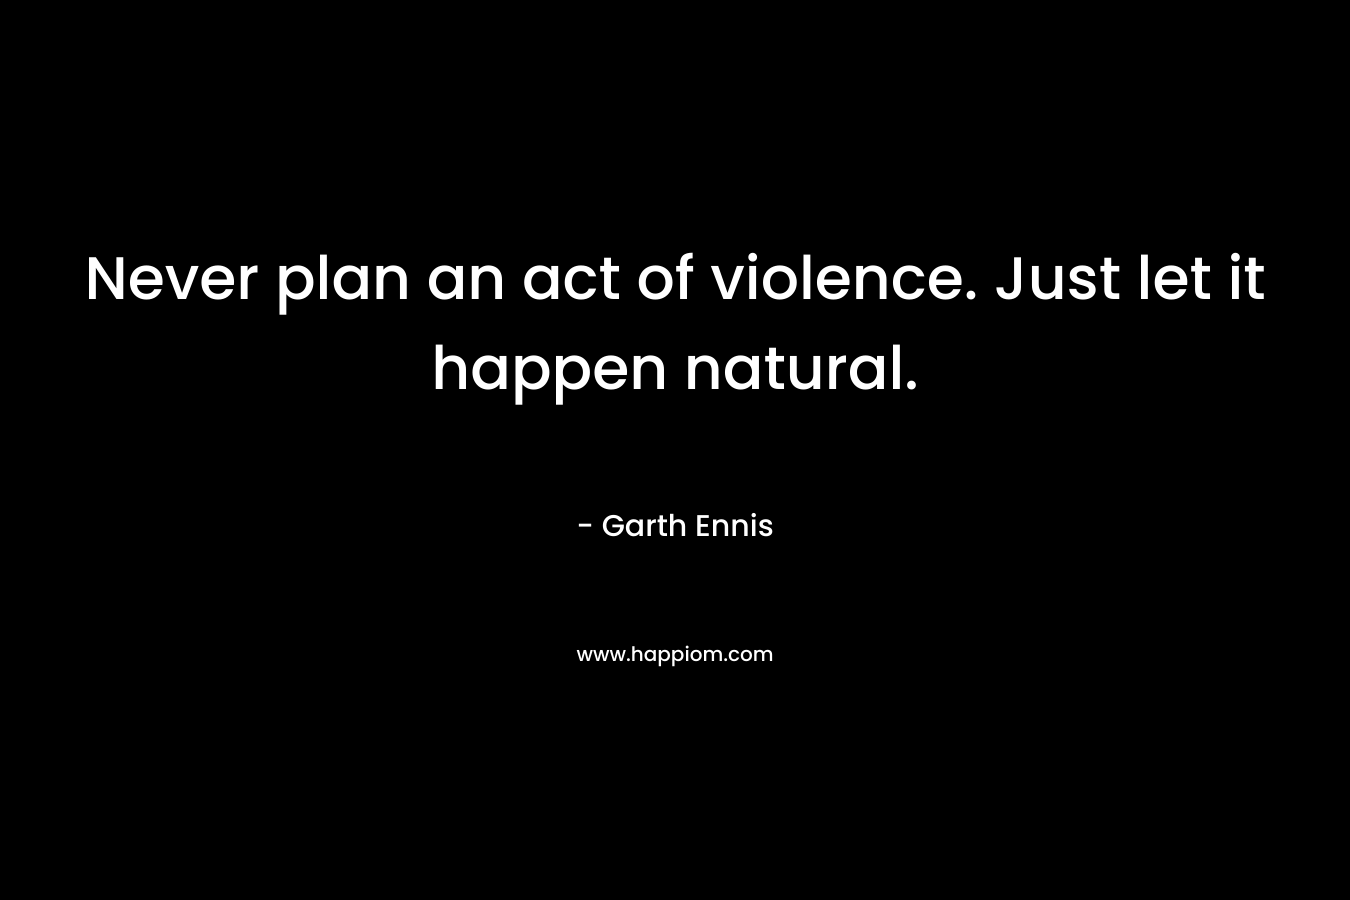 Never plan an act of violence. Just let it happen natural.